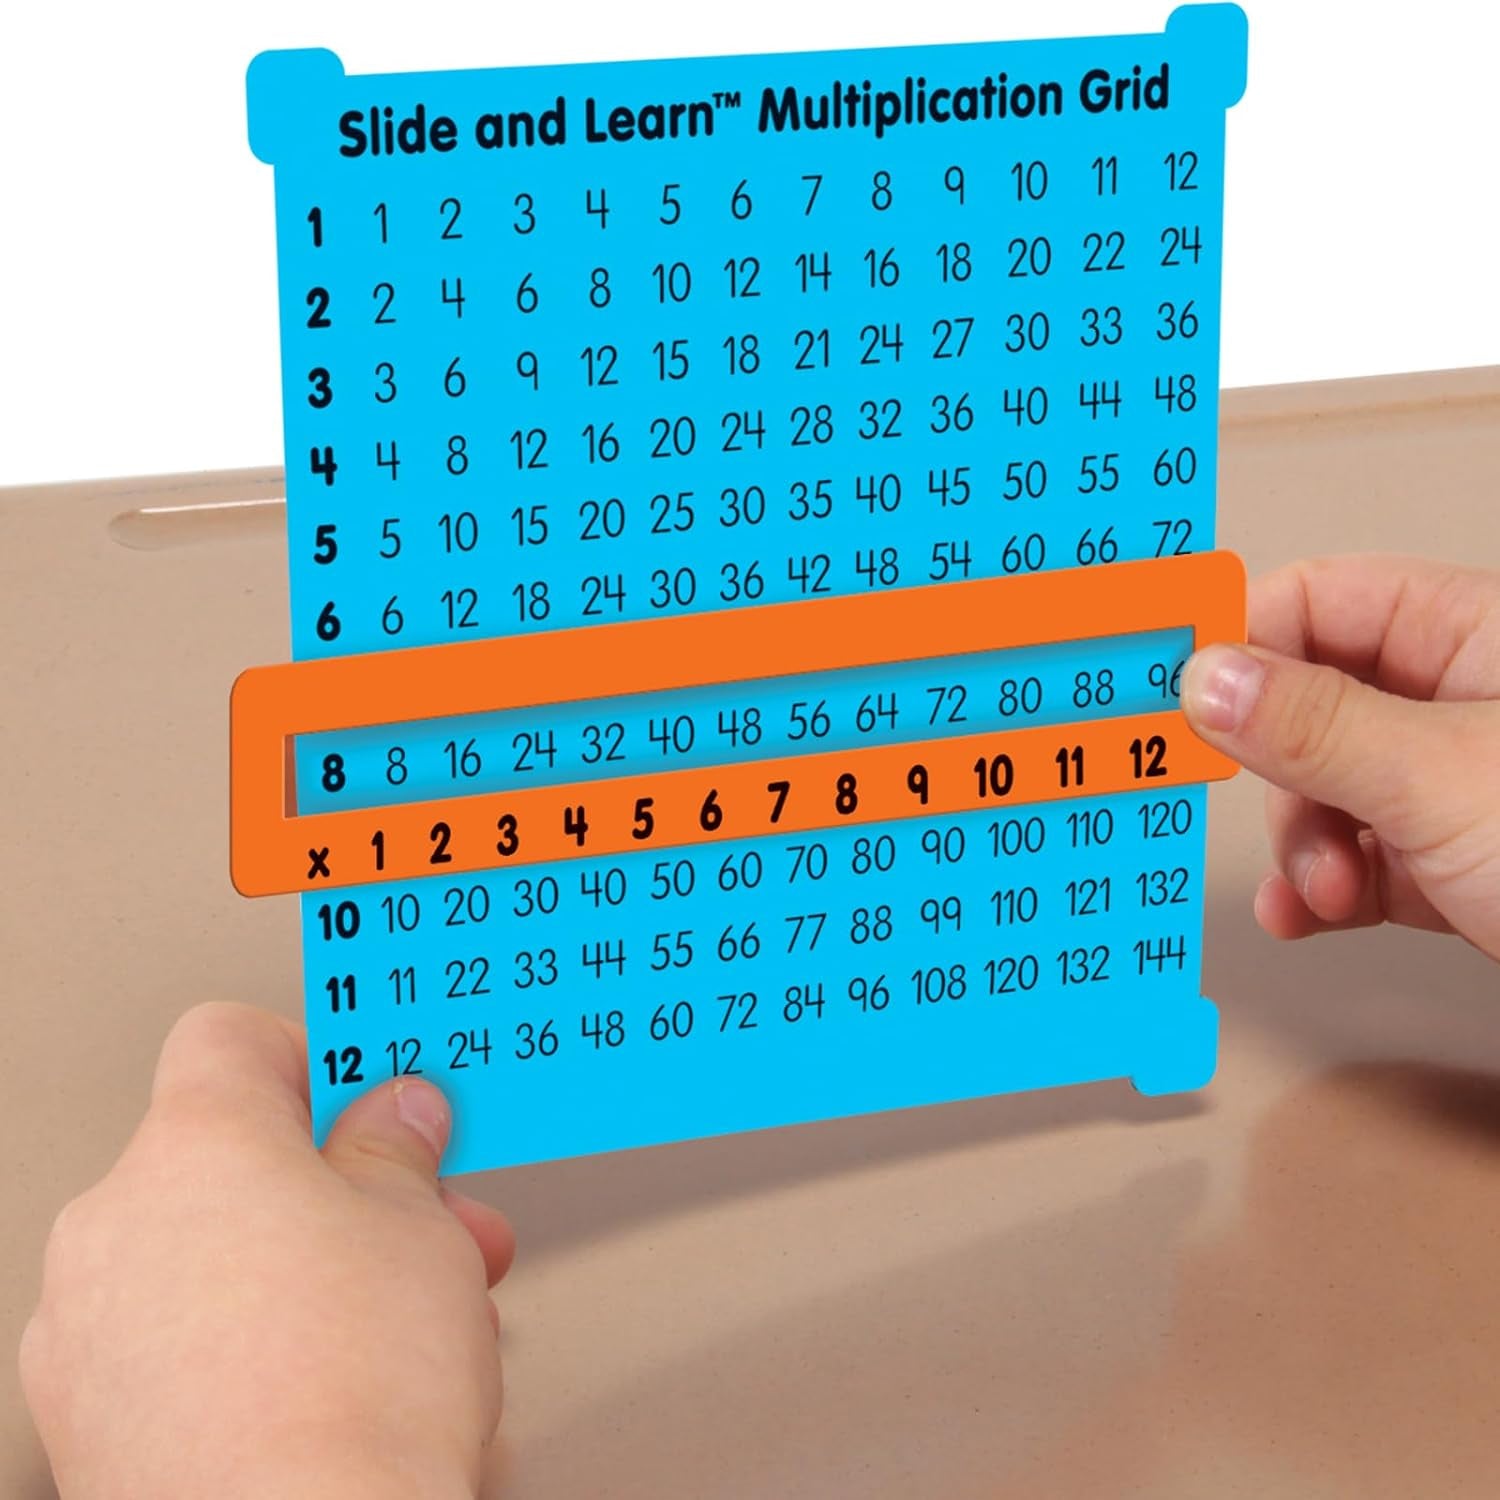 Slide and Learn Multiplication Grids, 5?” by 5½” (Set of 12) – Thin Plastic Multiplication Grid with Viewer Window – Help with Multiplication Problems and Practice Tracking at School